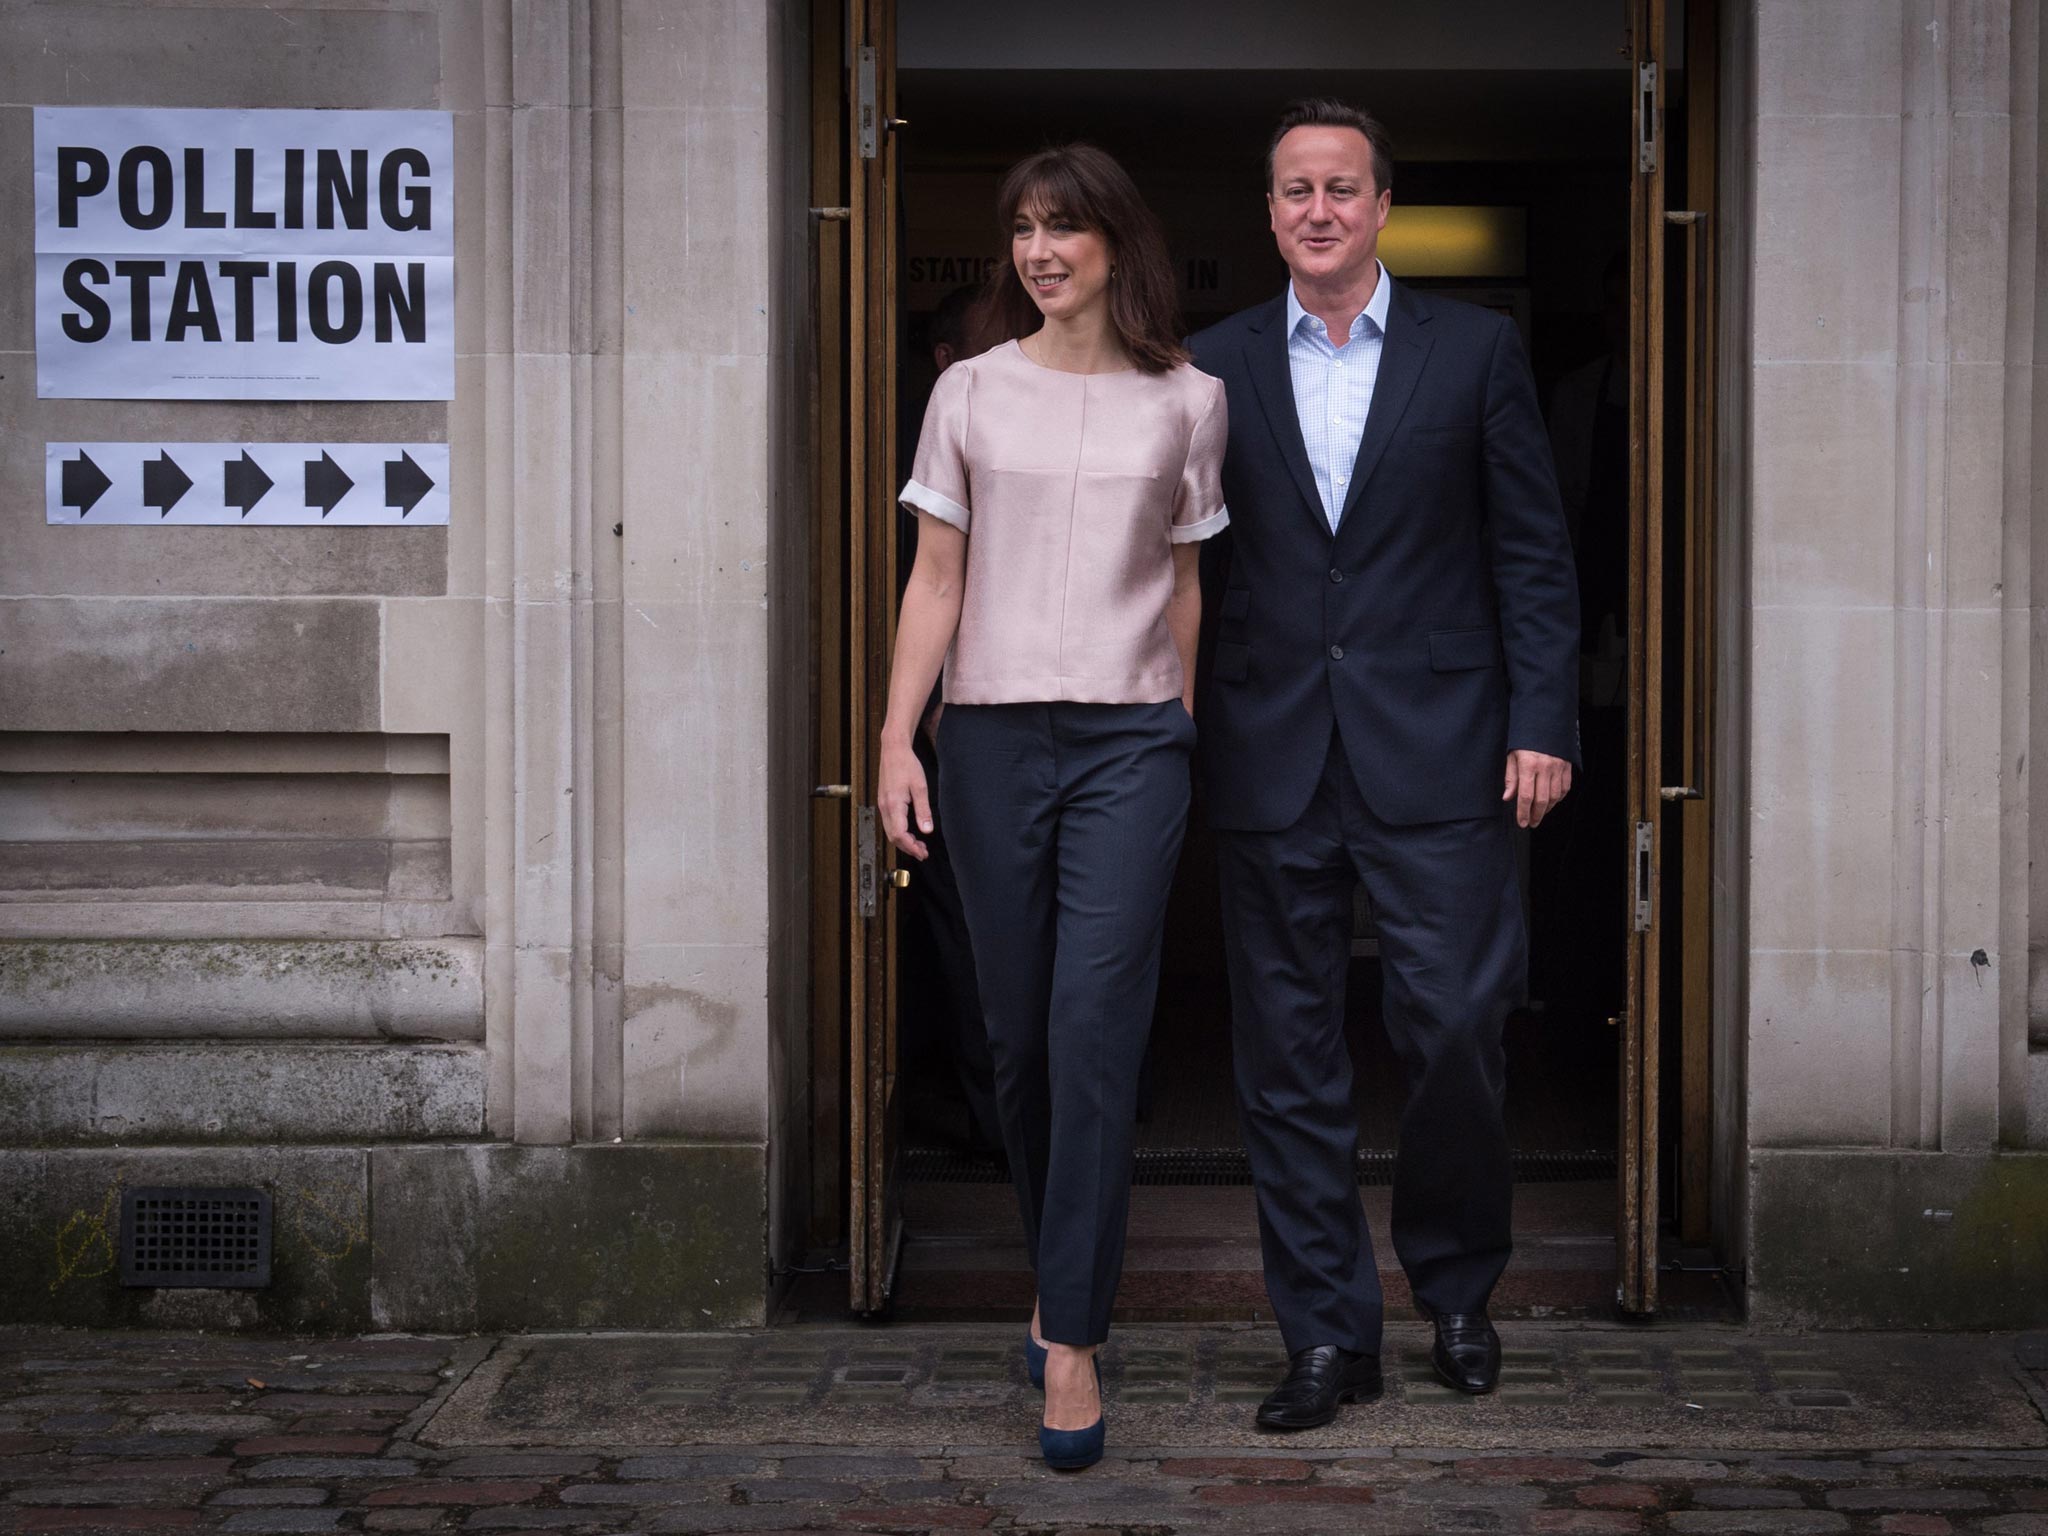 David and Samantha Cameron voted in London